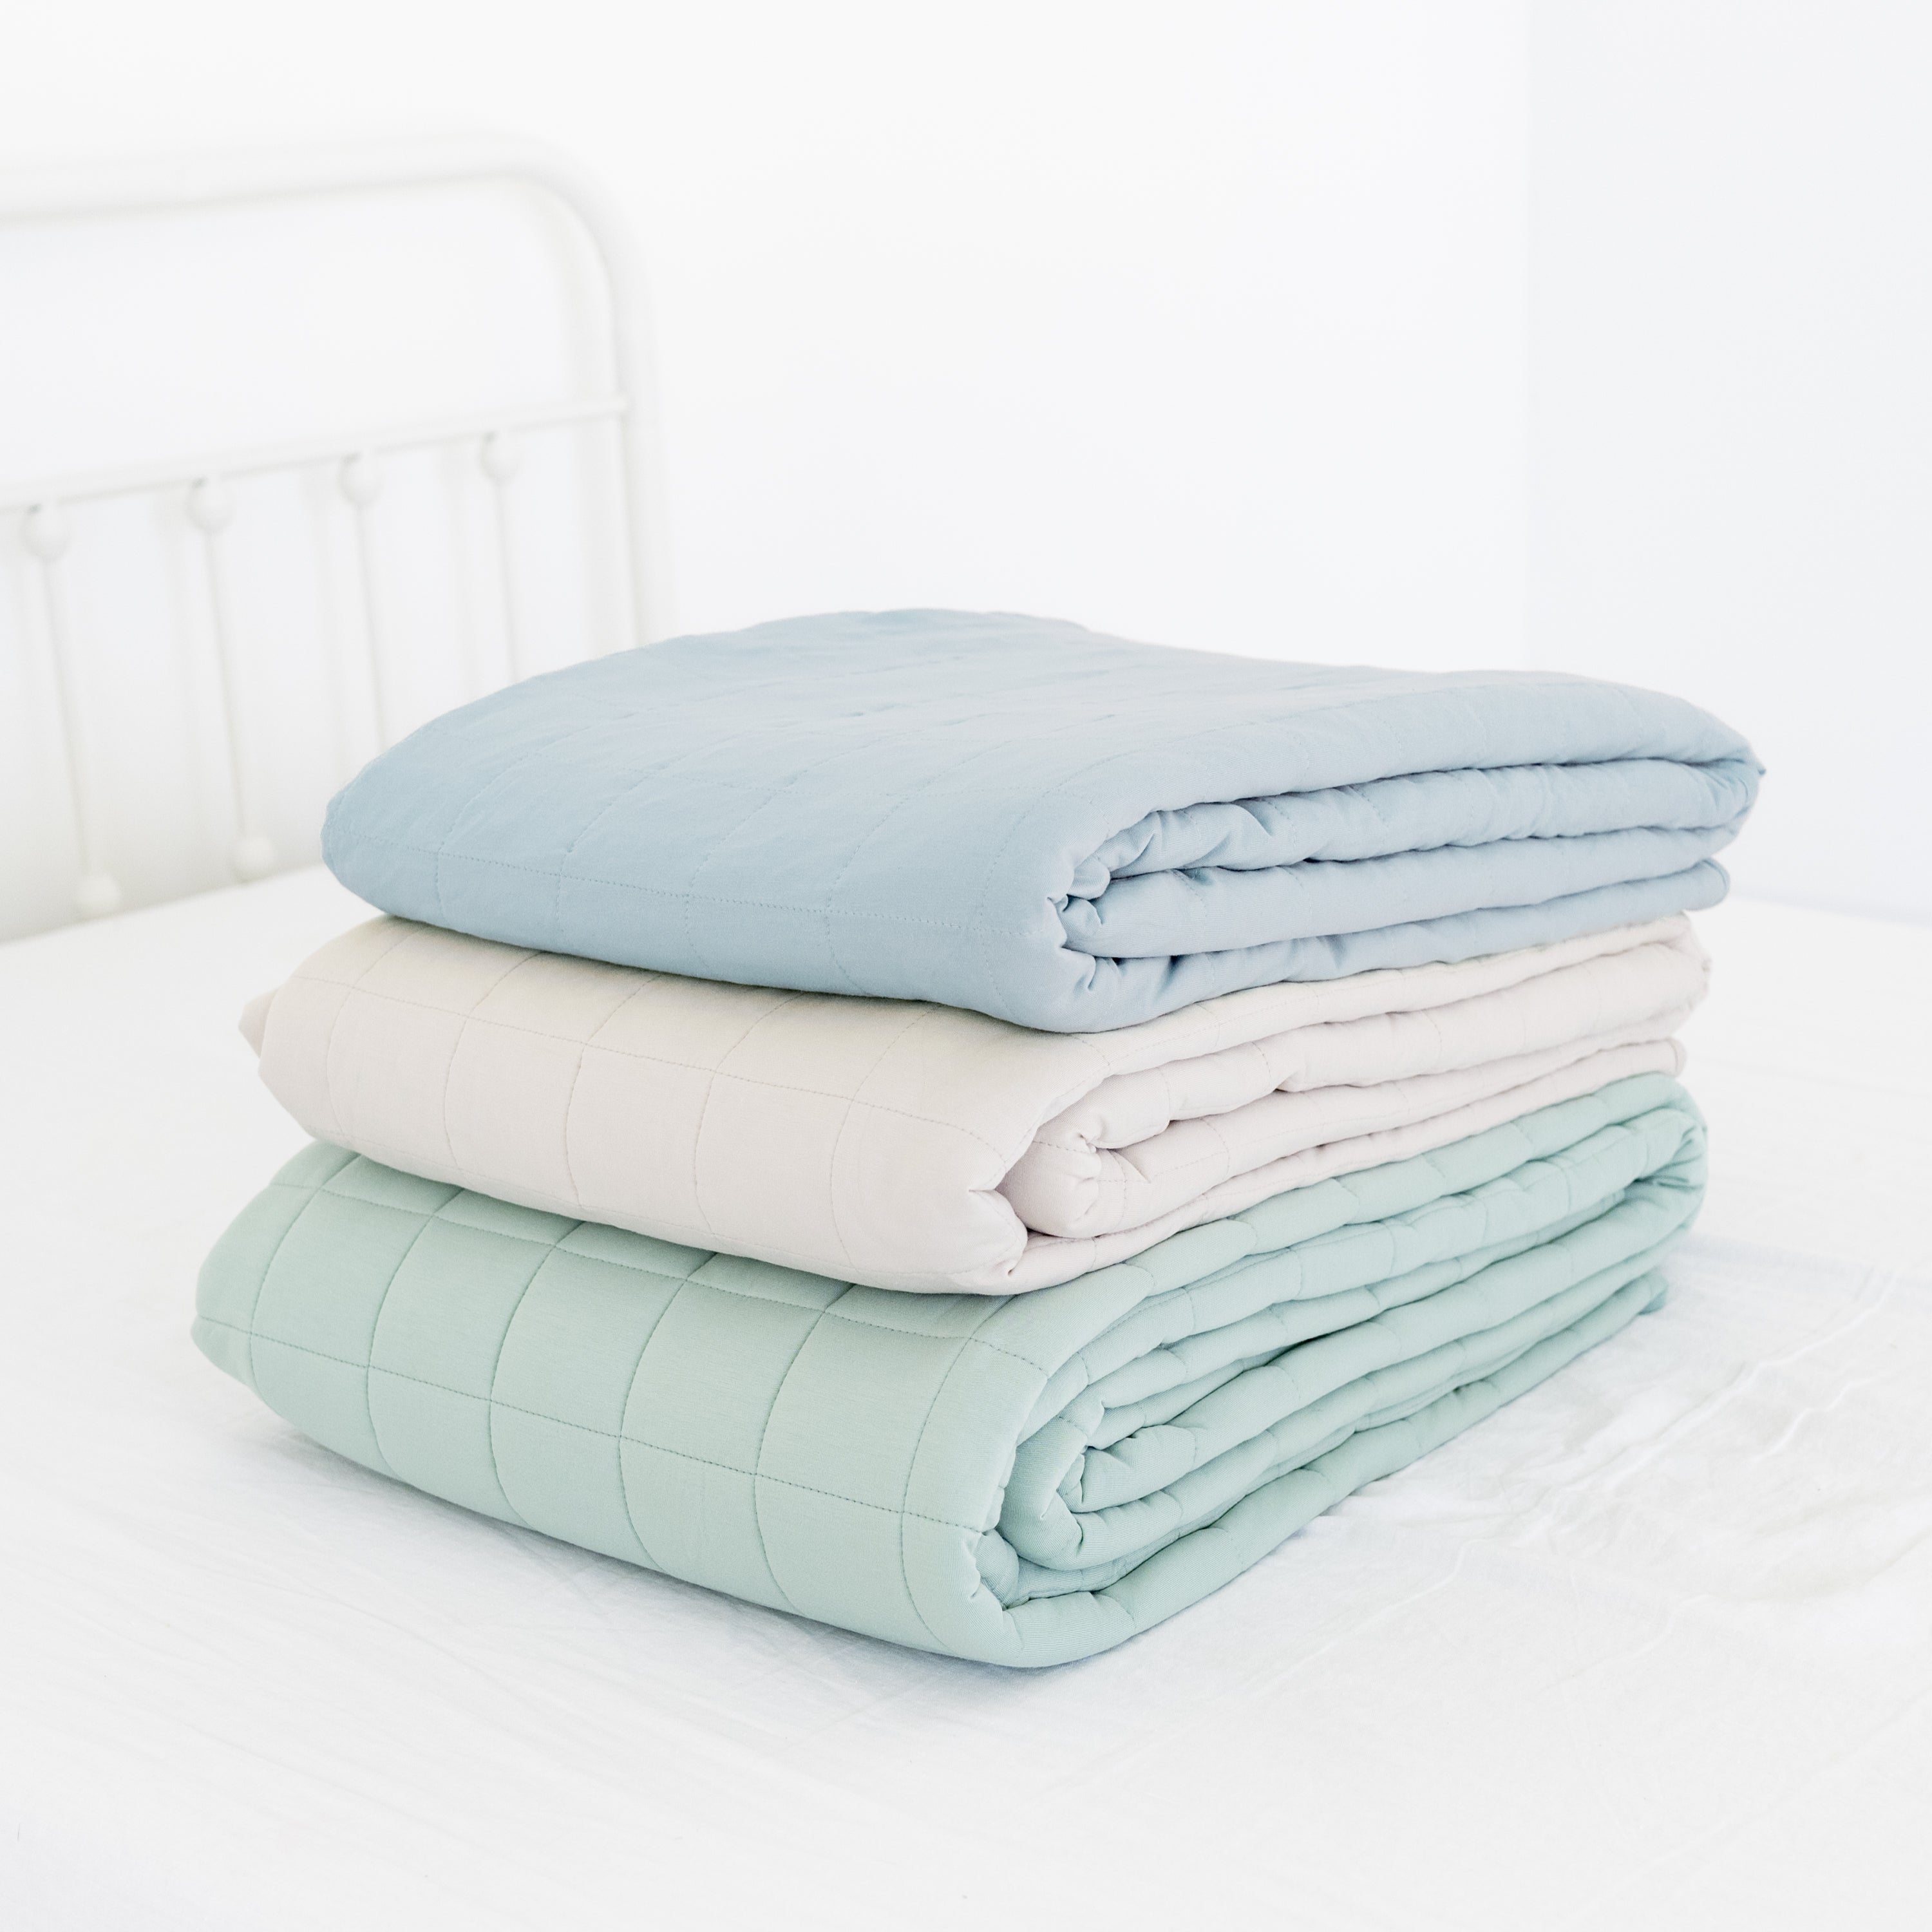 The Kyte Baby Blanket Guide